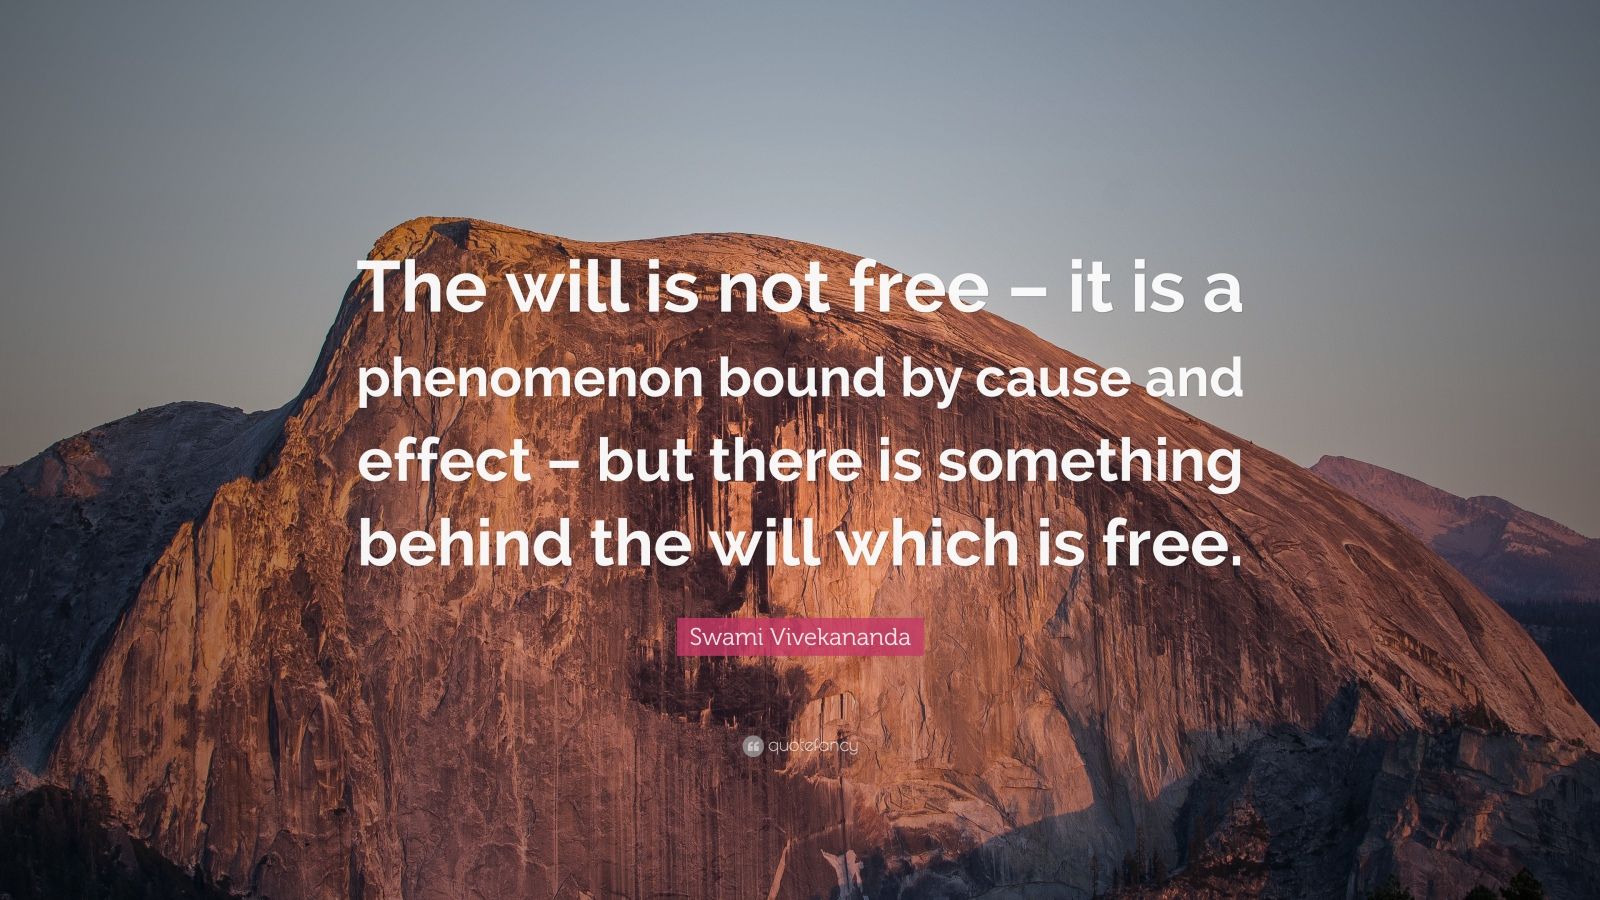 Swami Vivekananda Quote: “The will is not free – it is a phenomenon ...